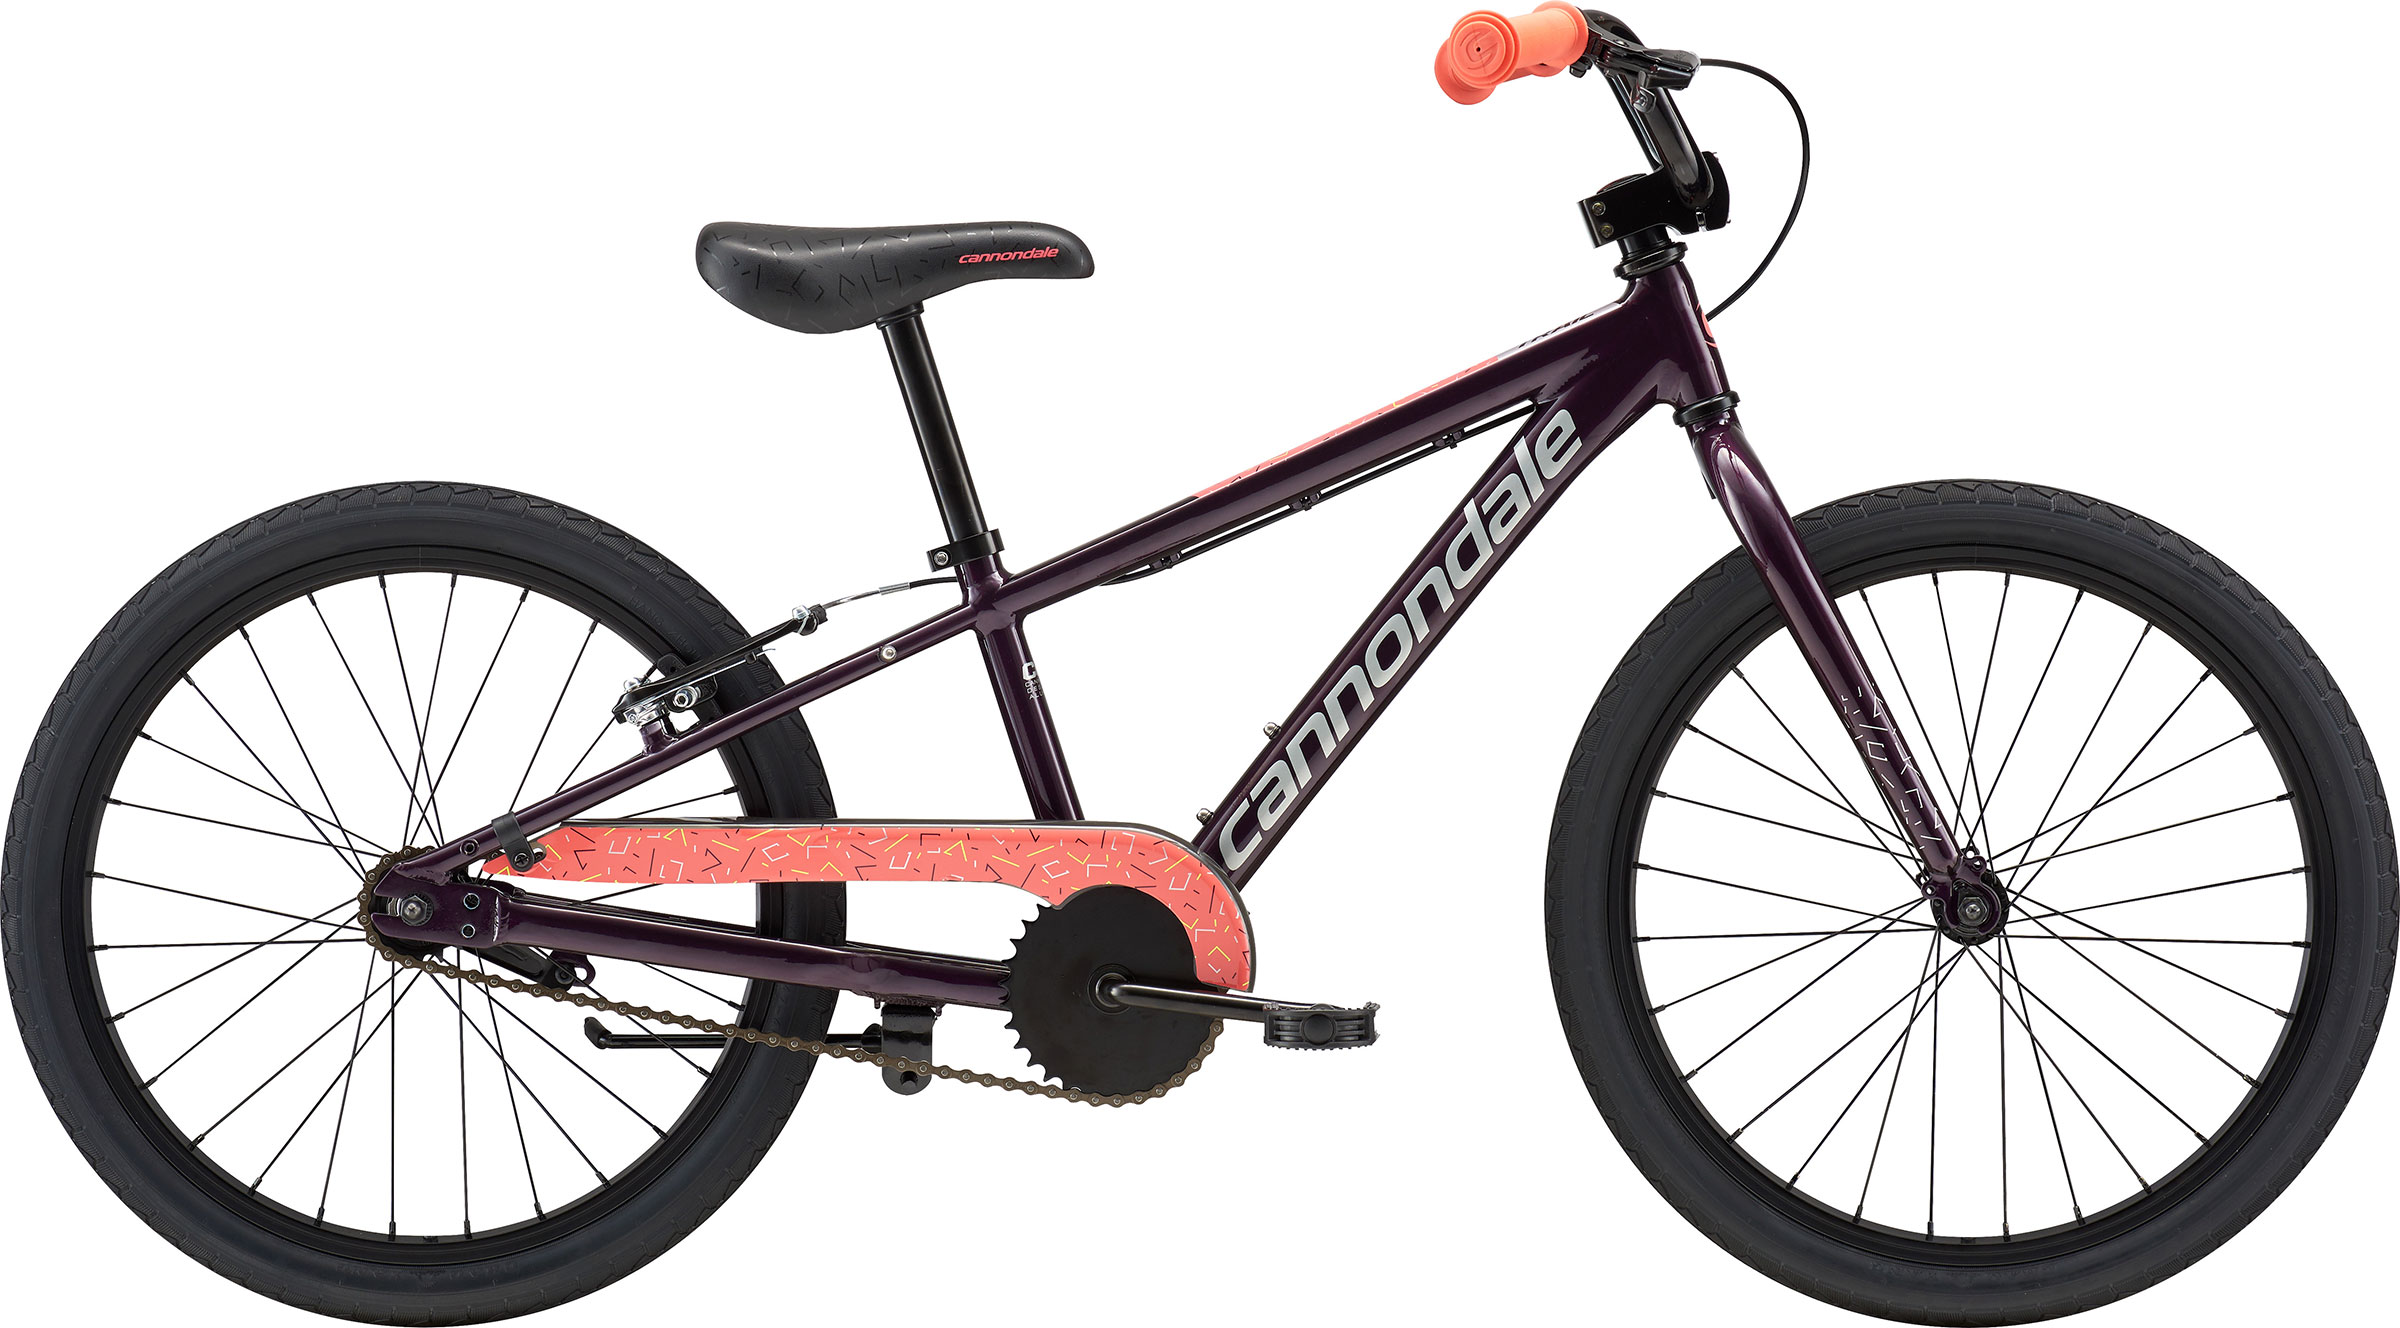 INV-74089 Details about   2019 Cannondale Trail 20 Single-Speed Girl's Size Kids Good 